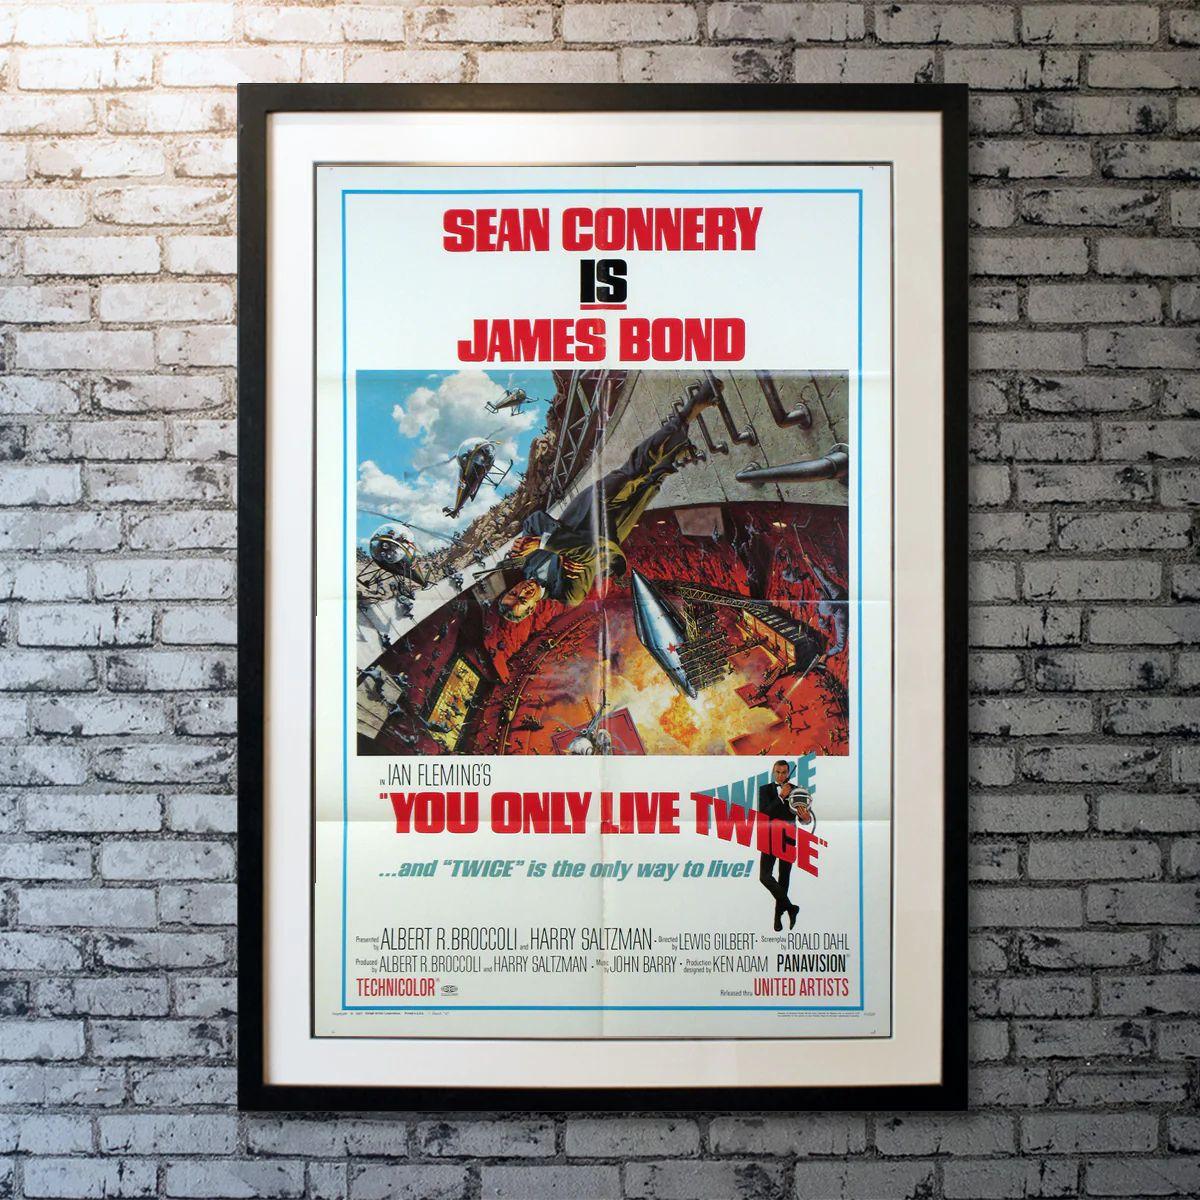 You Only Live Twice, Unframed Poster, 1967

Original US 1 Sheet (27 X 41 Inches). James Bond and the Japanese Secret Service must find and stop the true culprit of a series of space hijackings, before war is provoked between Russia and the United